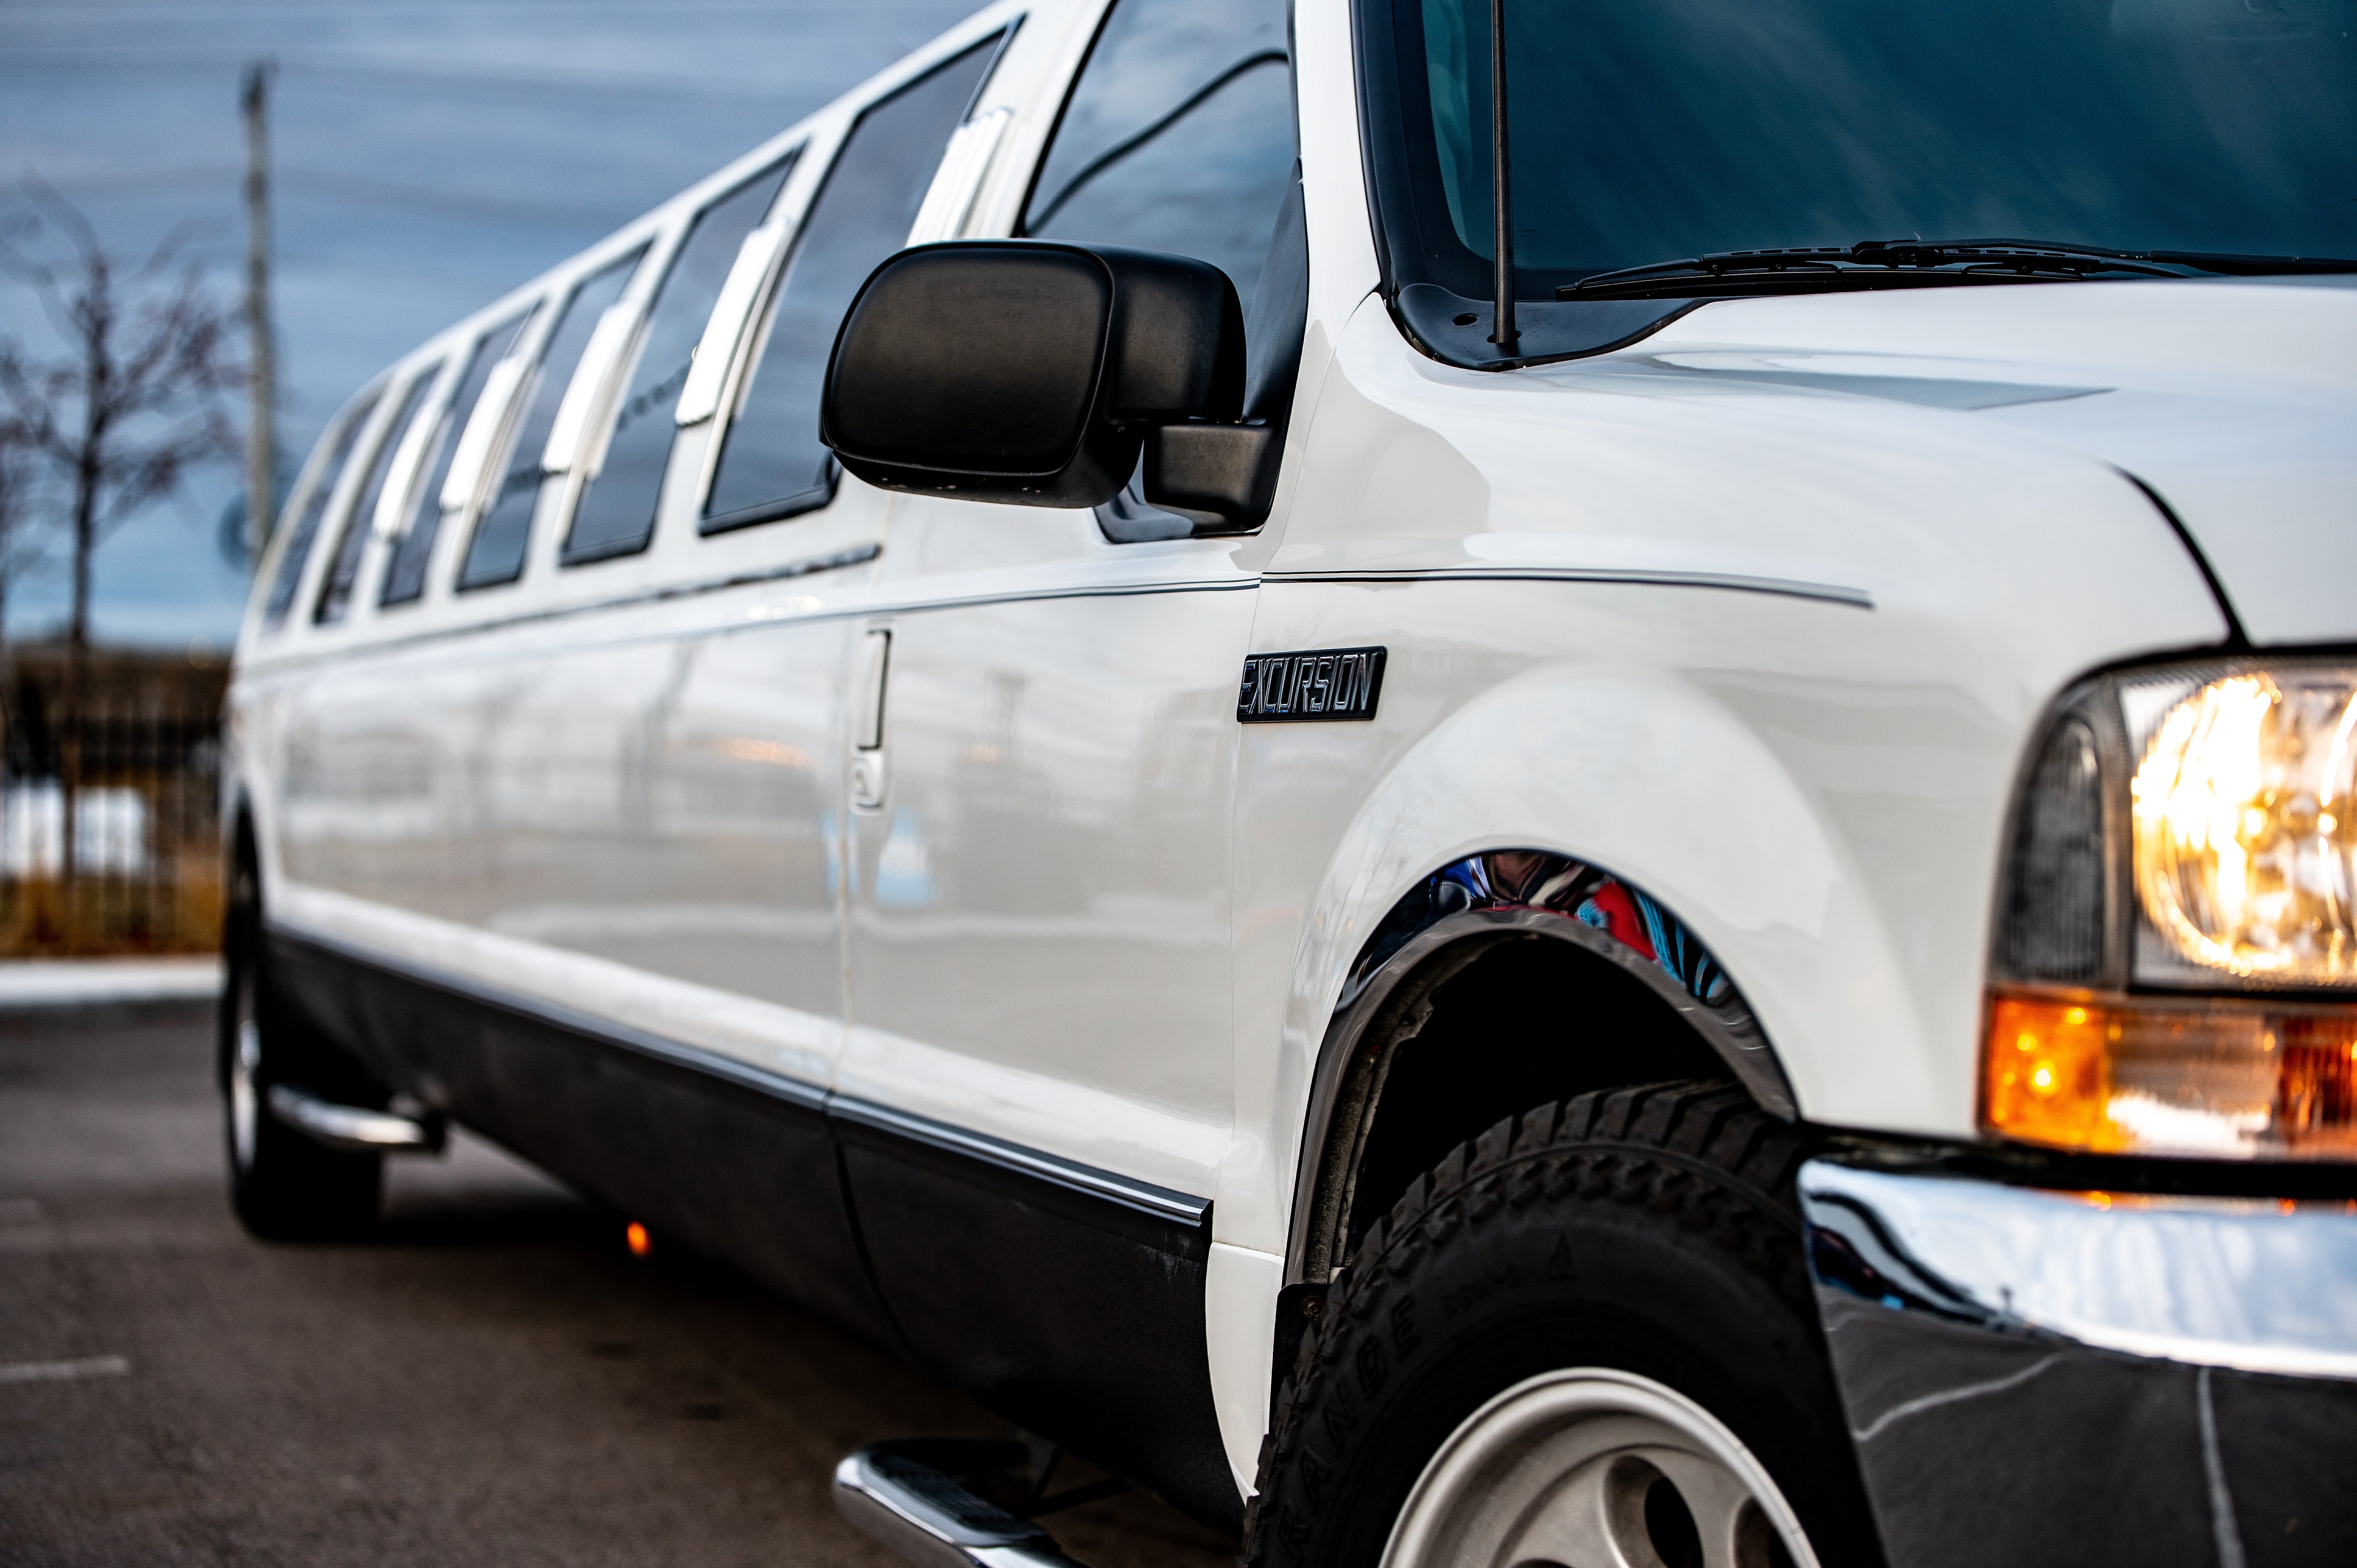 A white limo was parked outside Mary's house the following day. | Source: Pexels